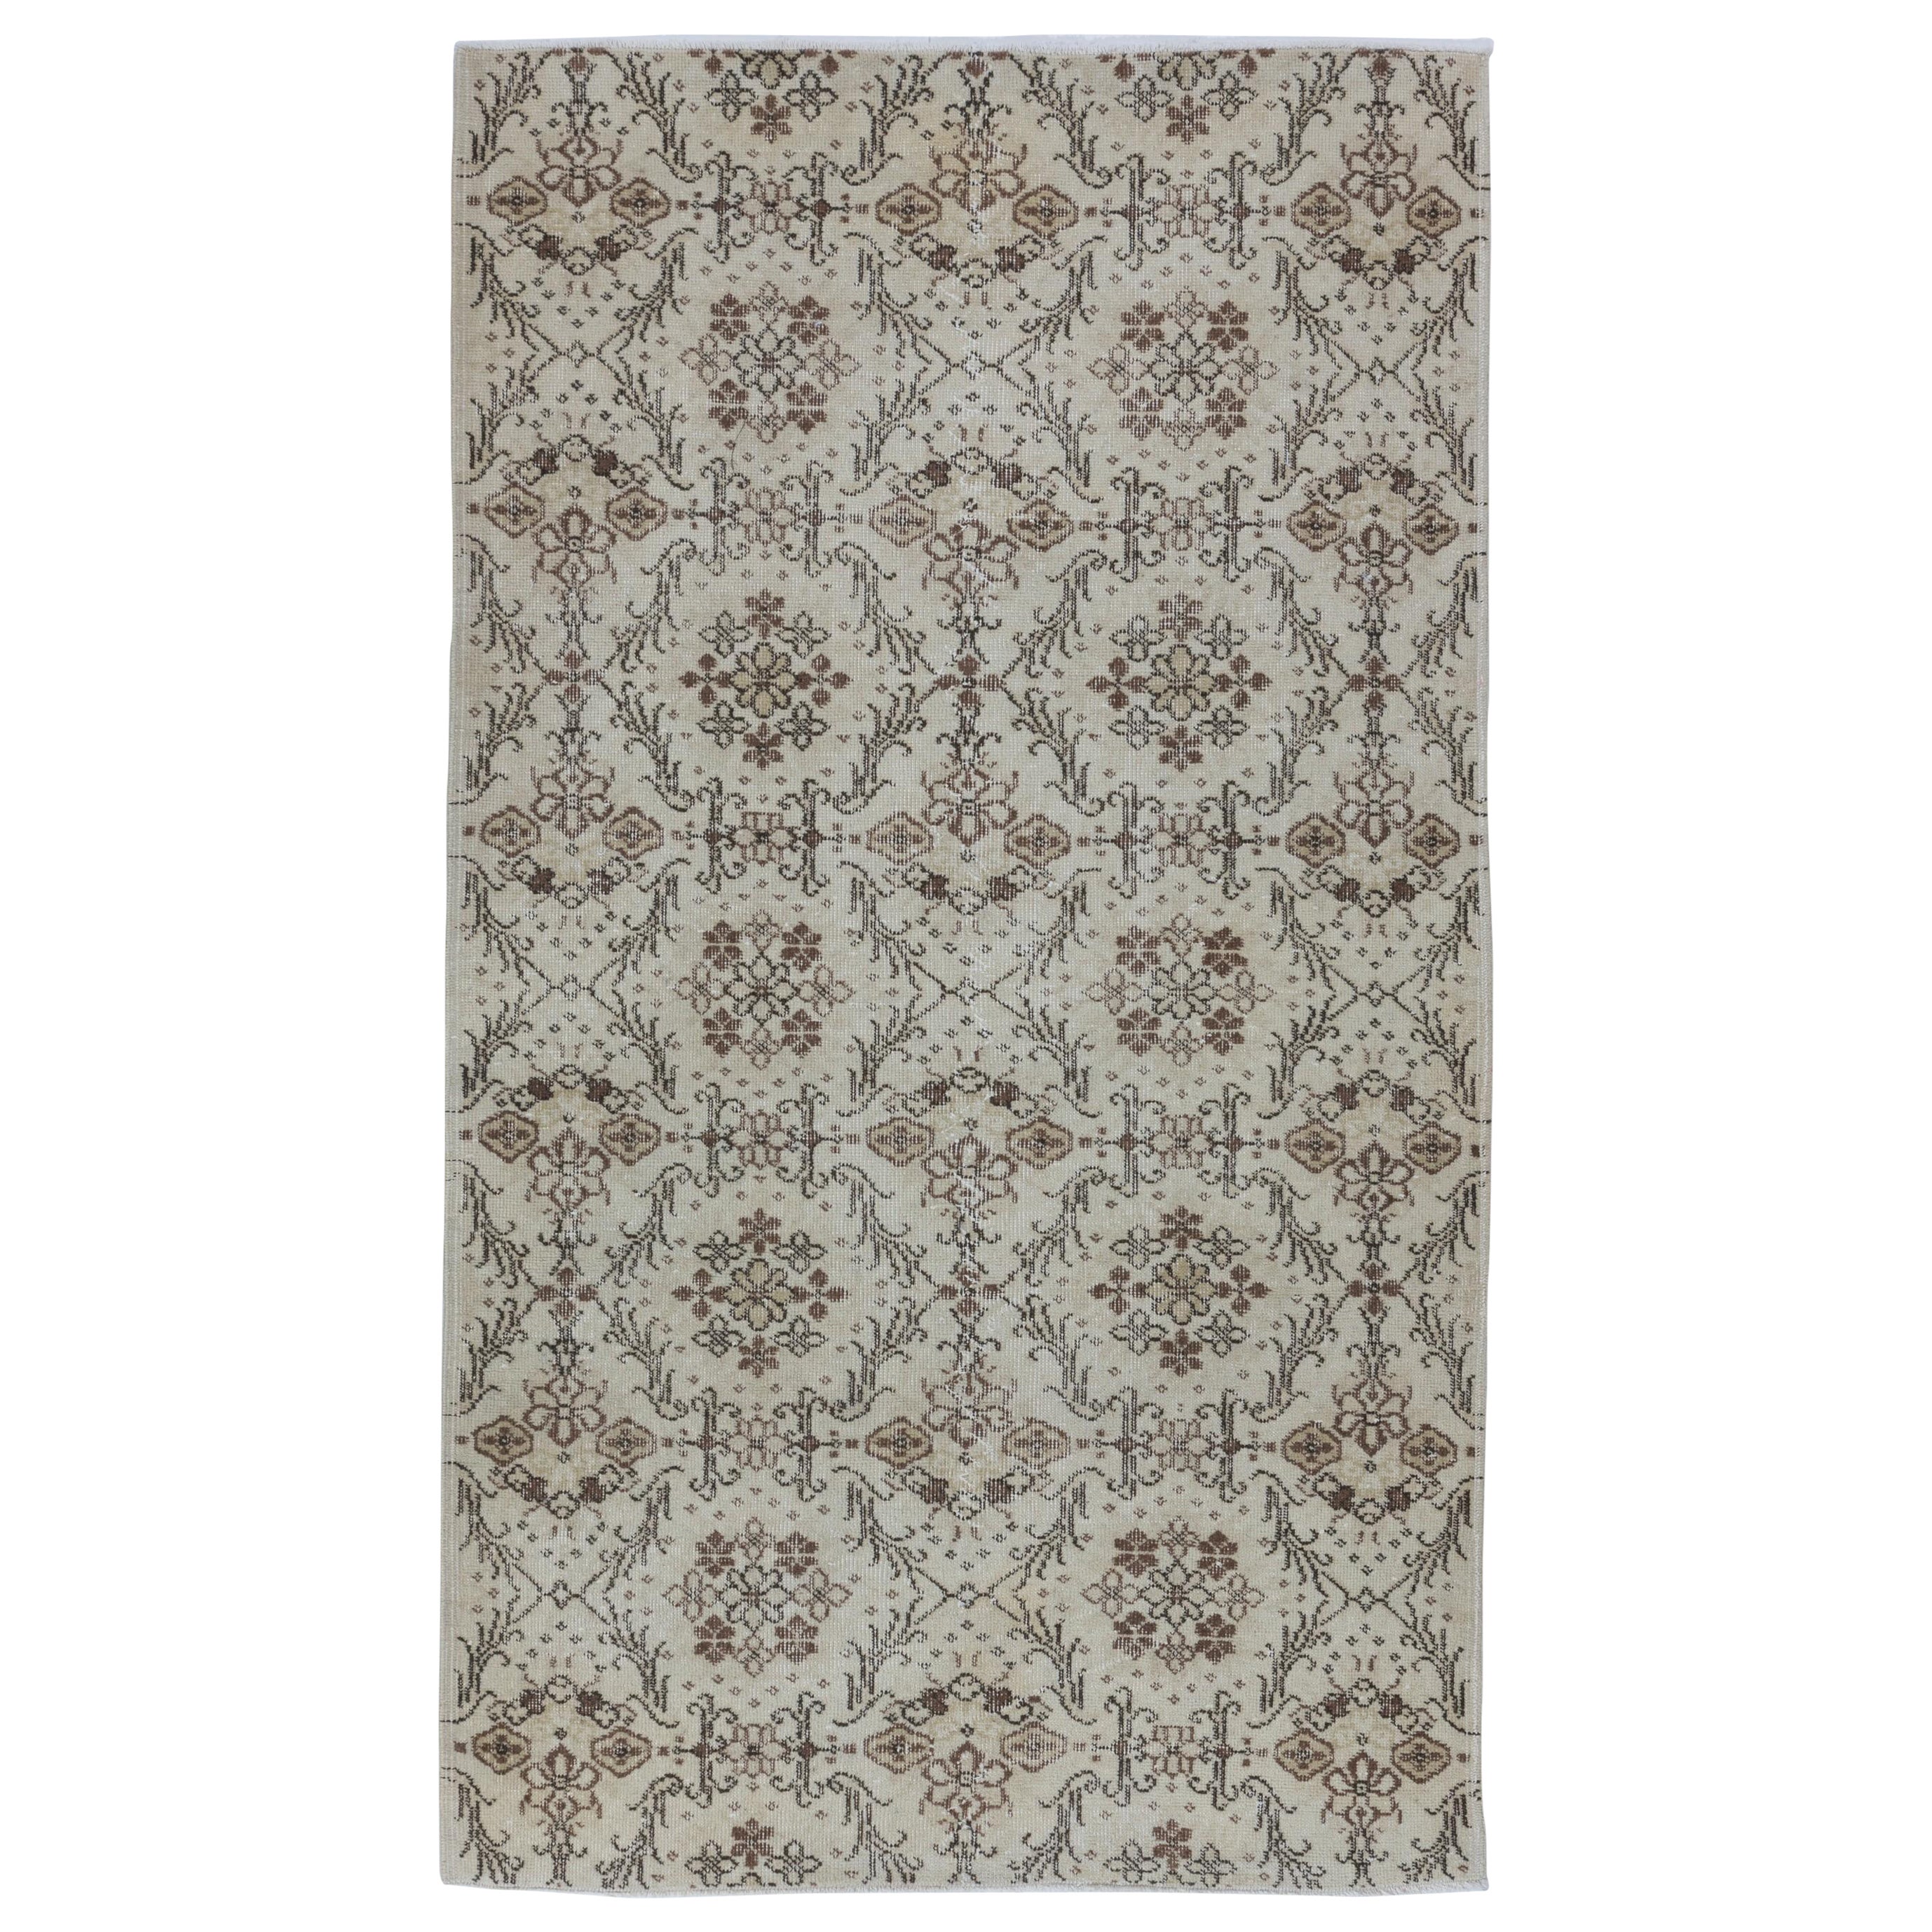 4x7 ft Vintage Handmade Turkish Accent Rug, Ideal for Home and Office